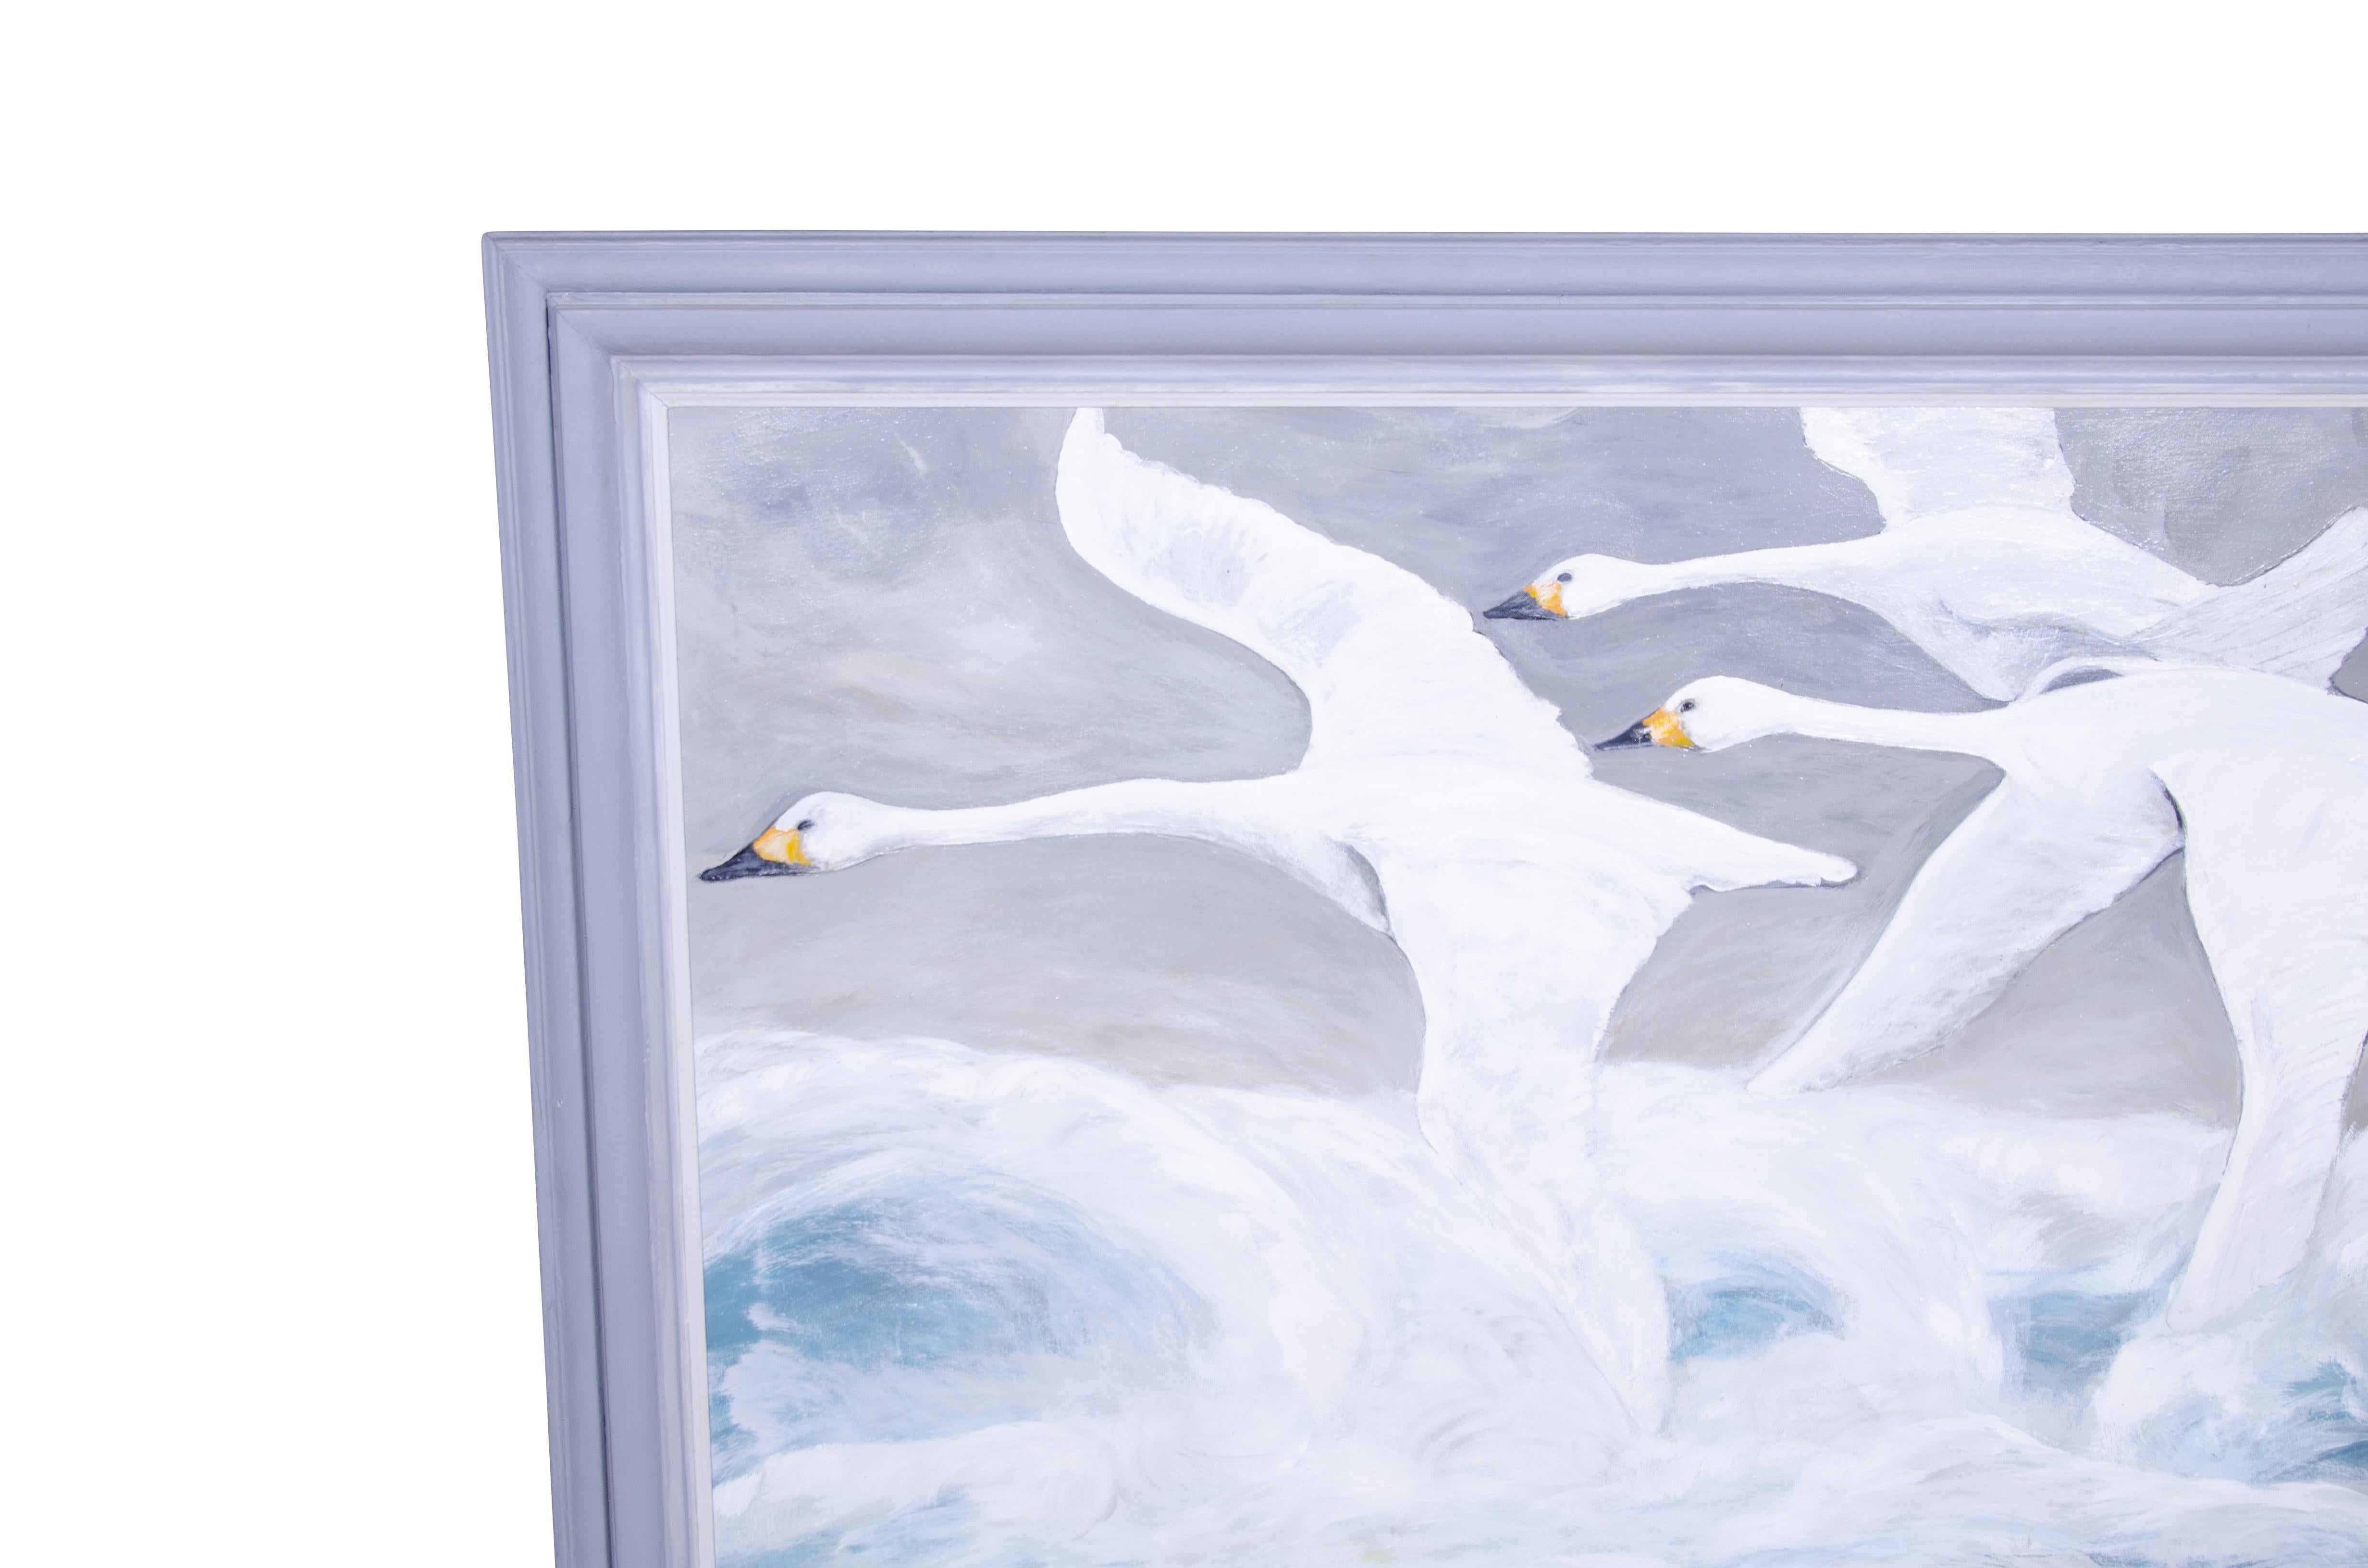 This painting hung over the mantle in a Bellevue Ave Newport RI home that recently sold for 18 million. Painted by a Newport artist William Chewning. Depicts swans flying low along the waves. Painted wood frame.